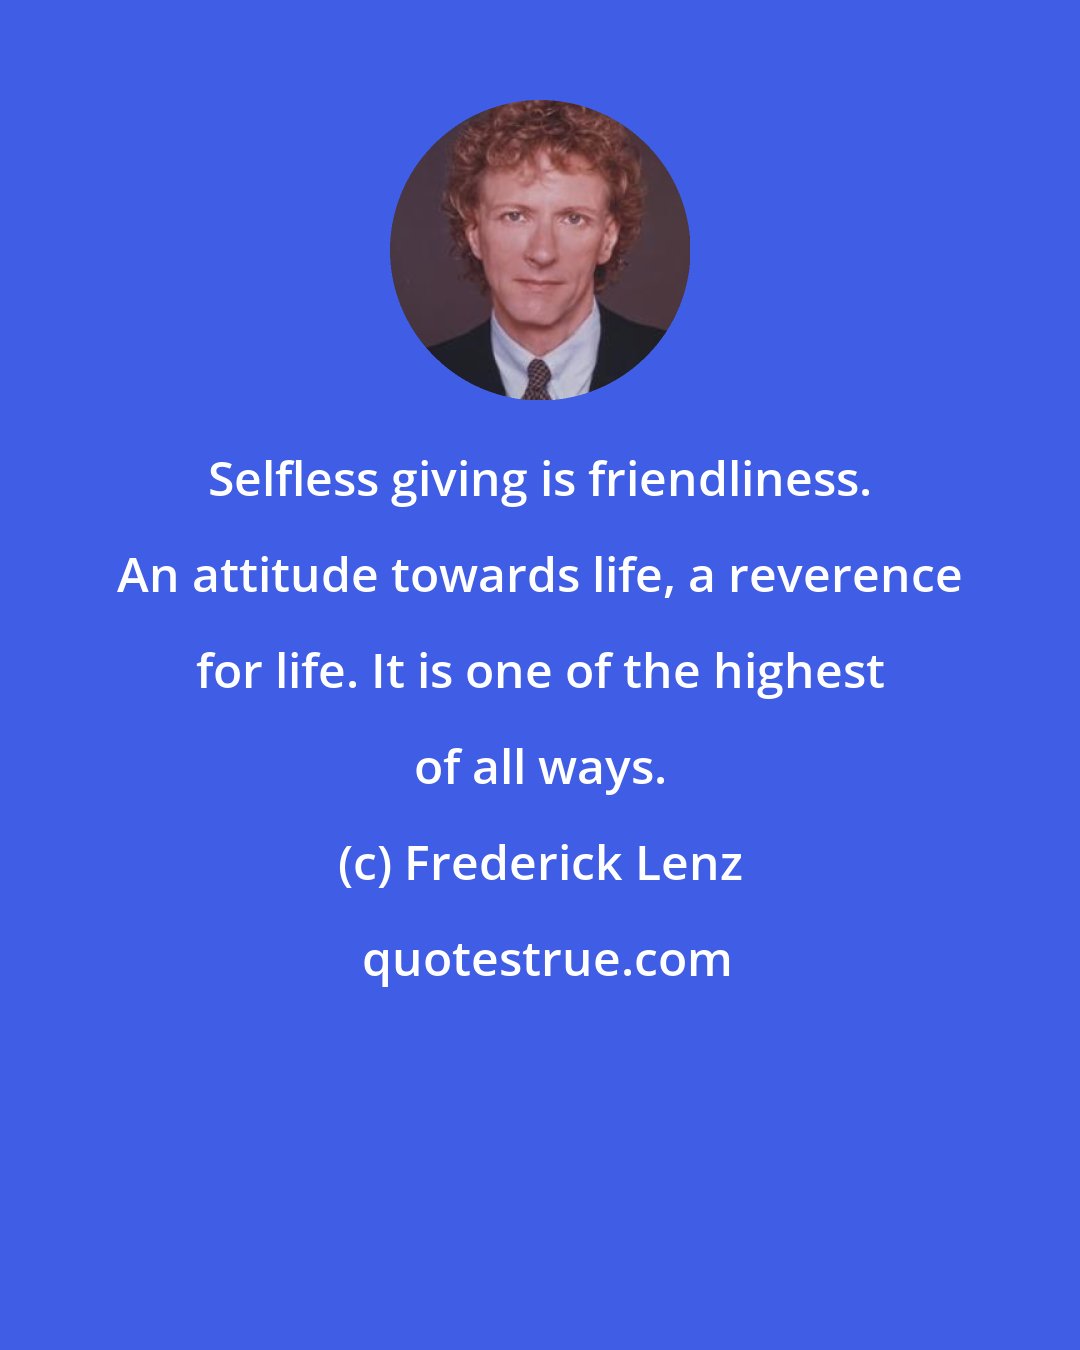 Frederick Lenz: Selfless giving is friendliness. An attitude towards life, a reverence for life. It is one of the highest of all ways.